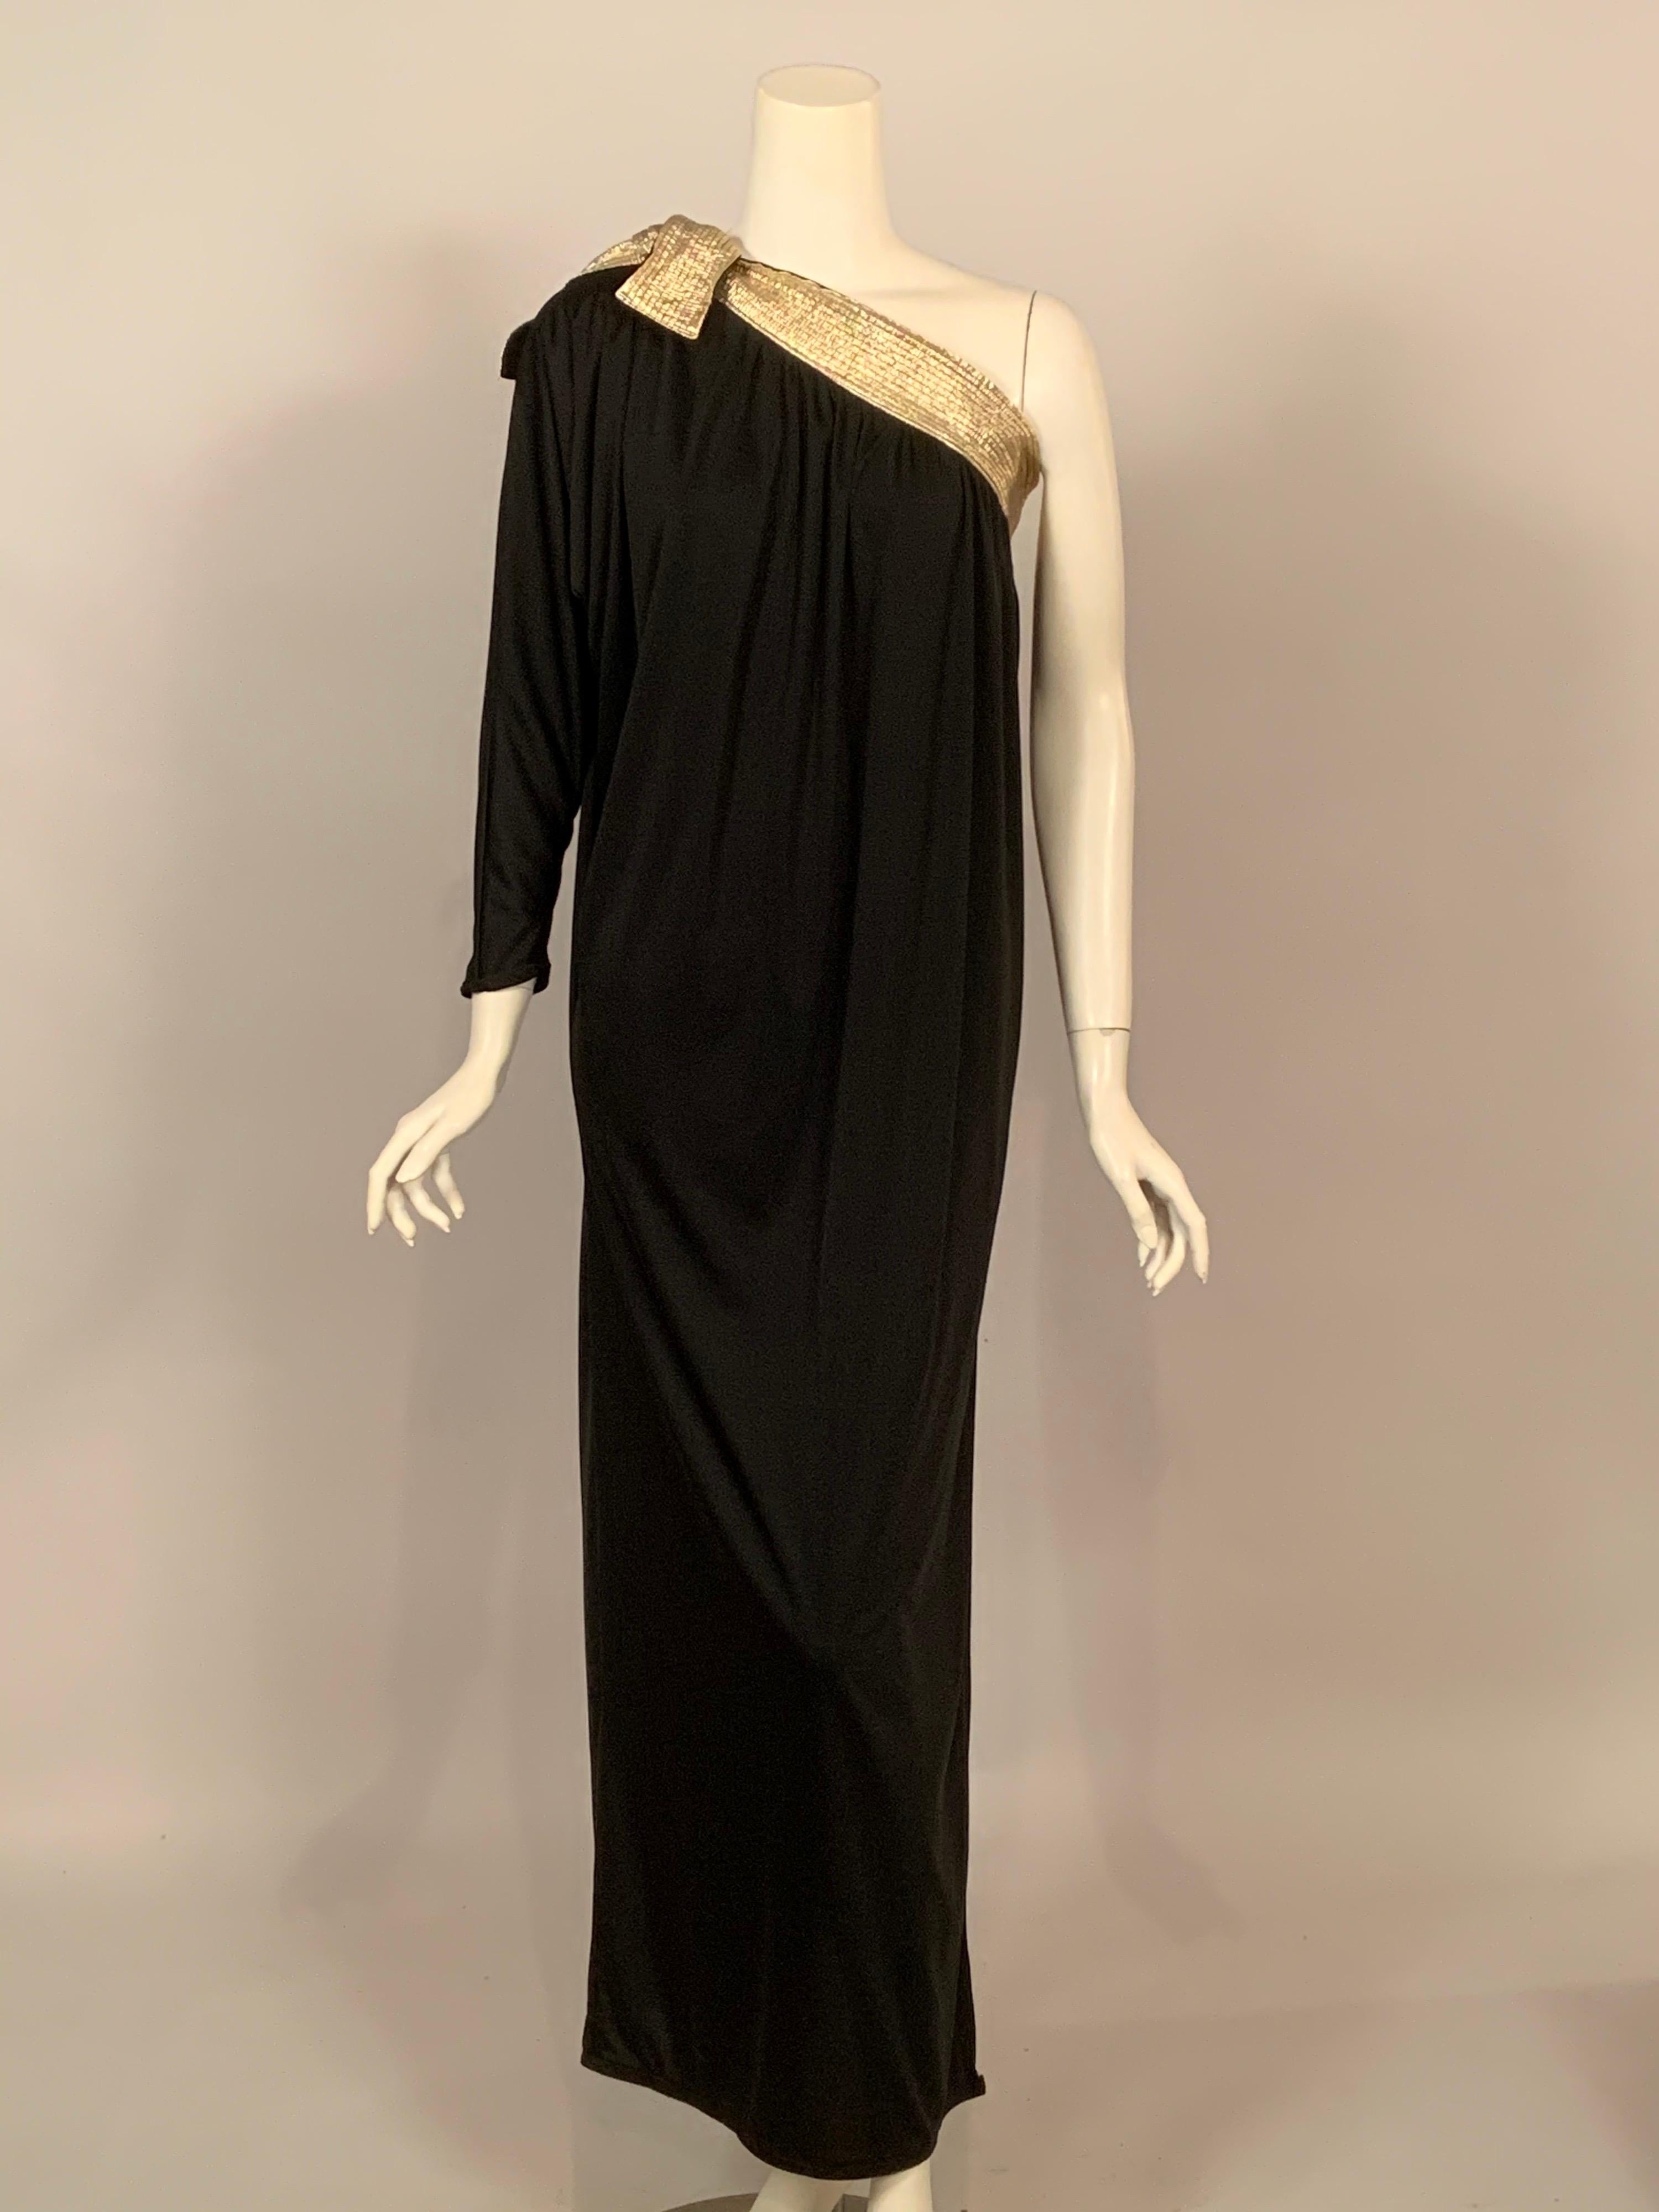 The elegance of an evening dress with the comfort of an at home outfit, Bill Tice designed both beautifully. This dress has a quilted band of metallic gold fabric at the bodice which ties above the single sleeve. The dress falls gently from this